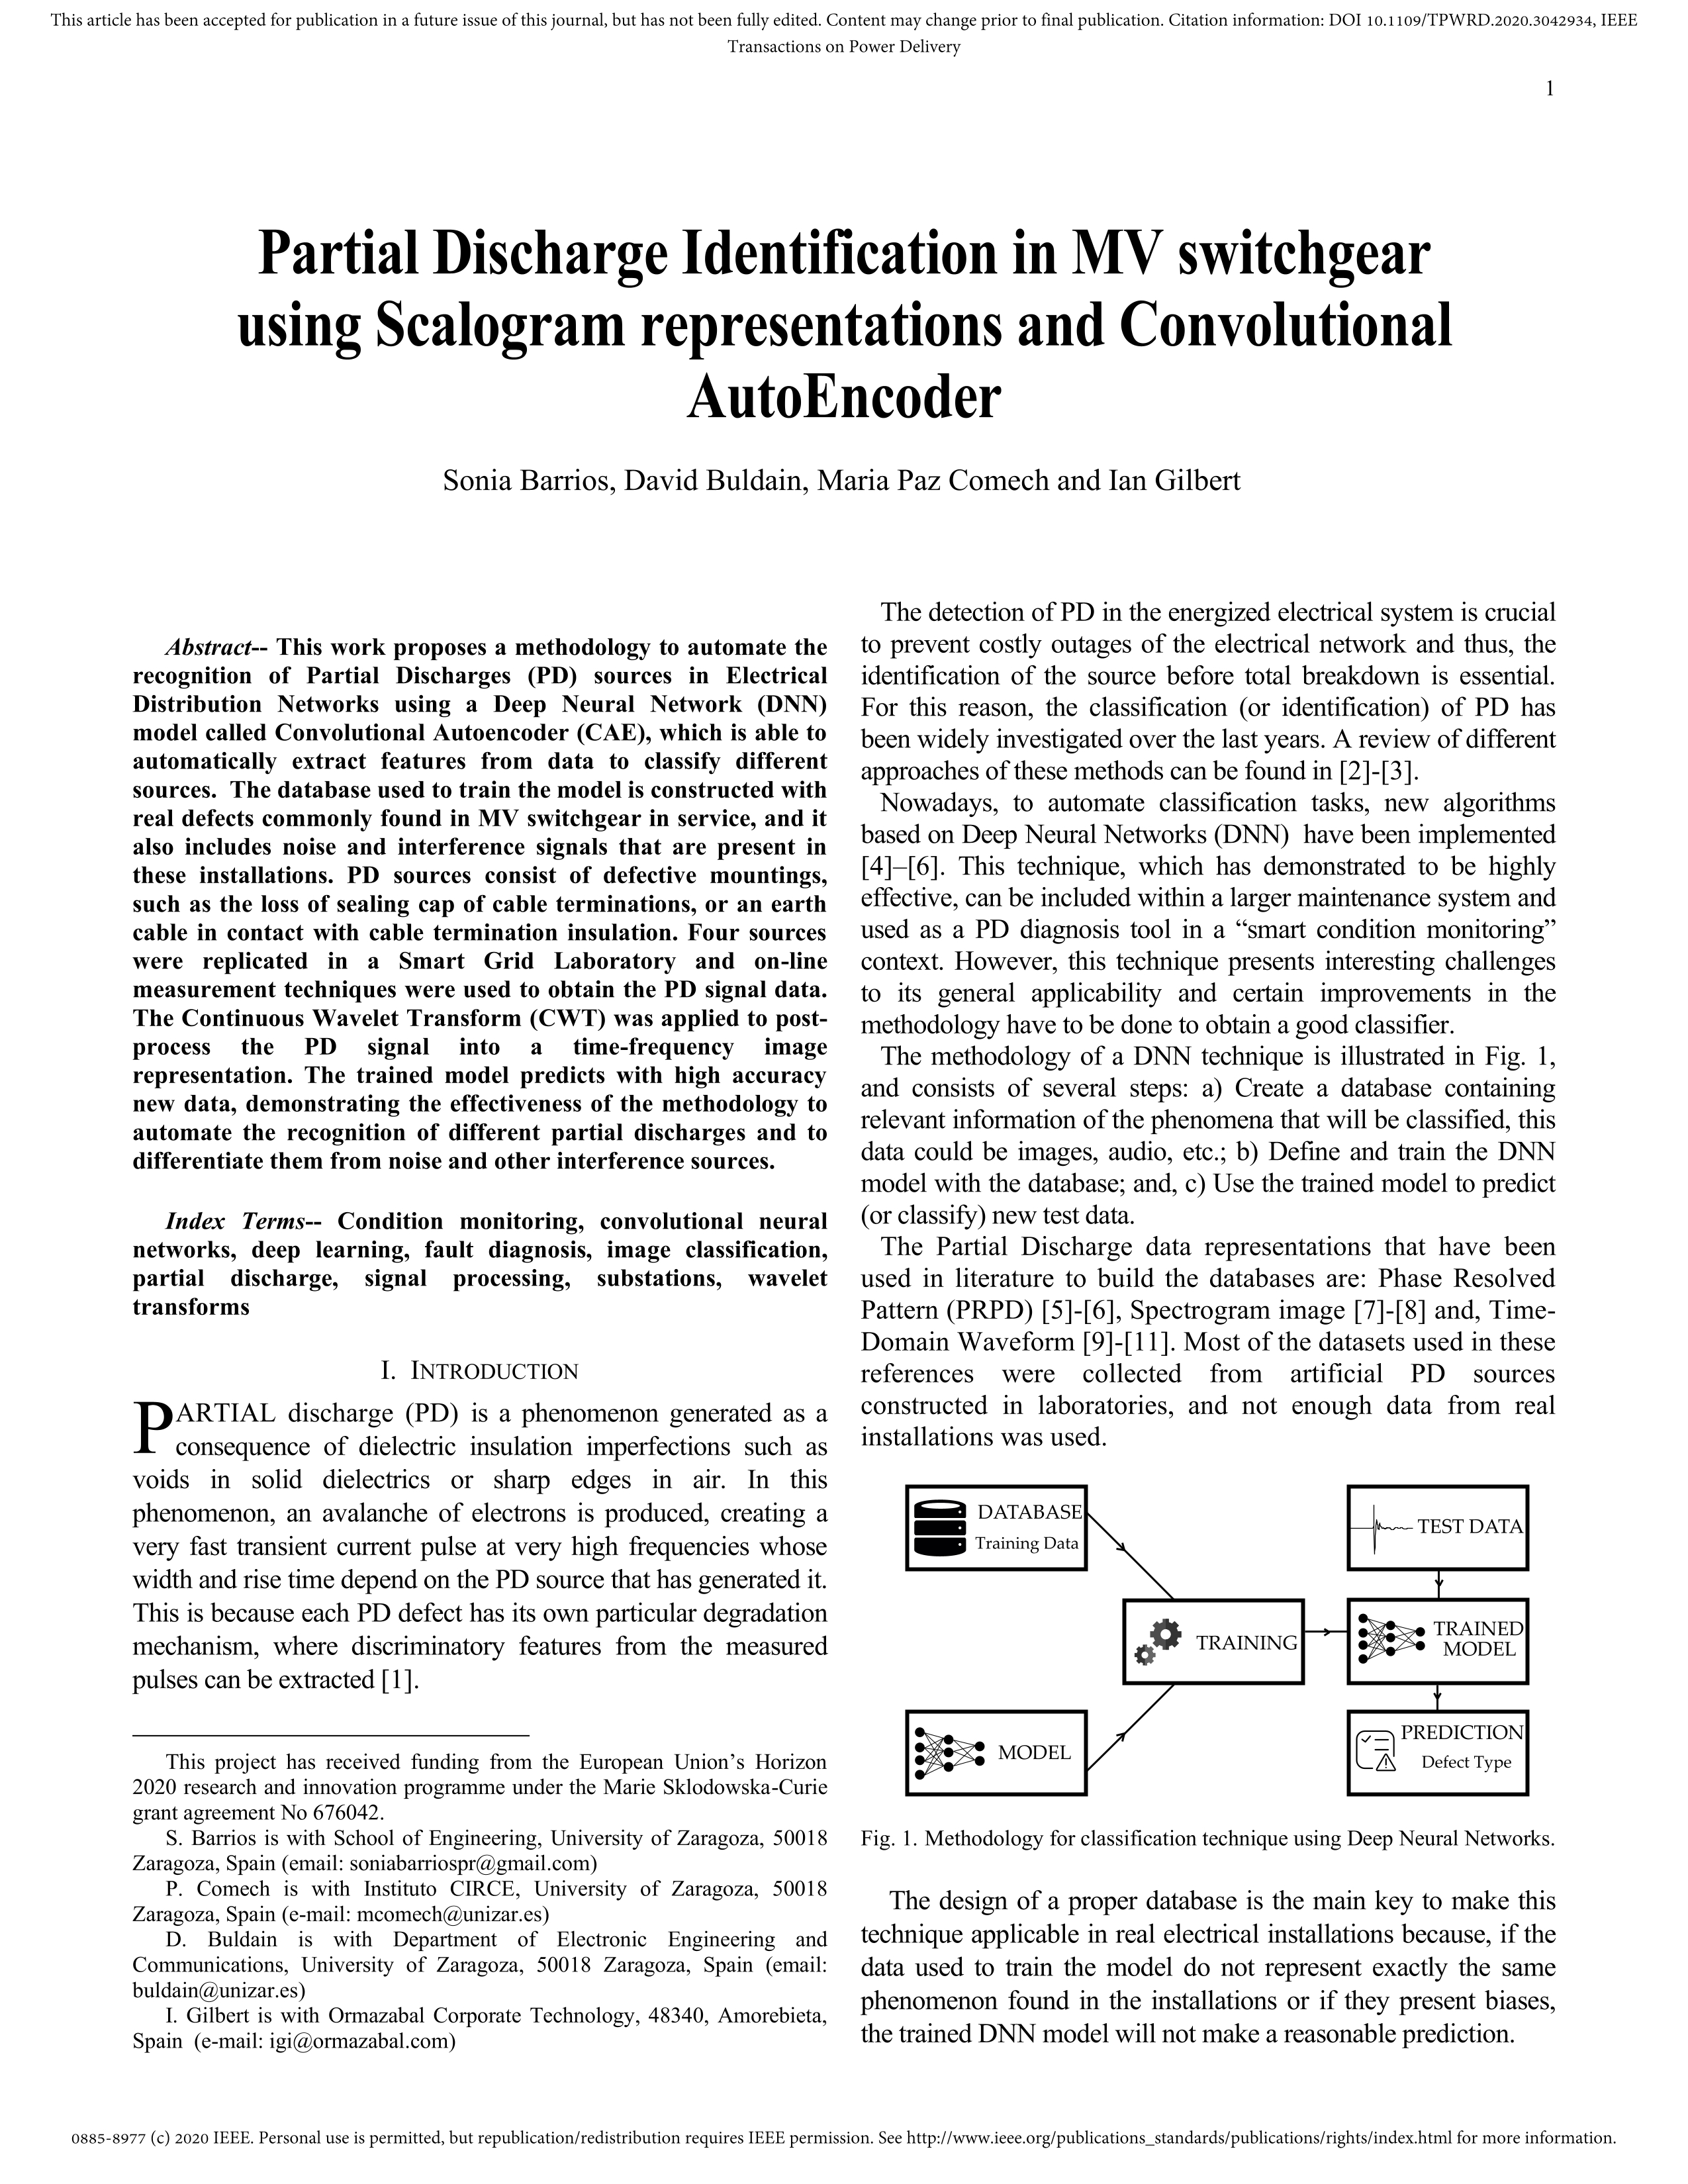 Partial Discharge Identification in MV switchgear using Scalogram representations and Convolutional AutoEncoder